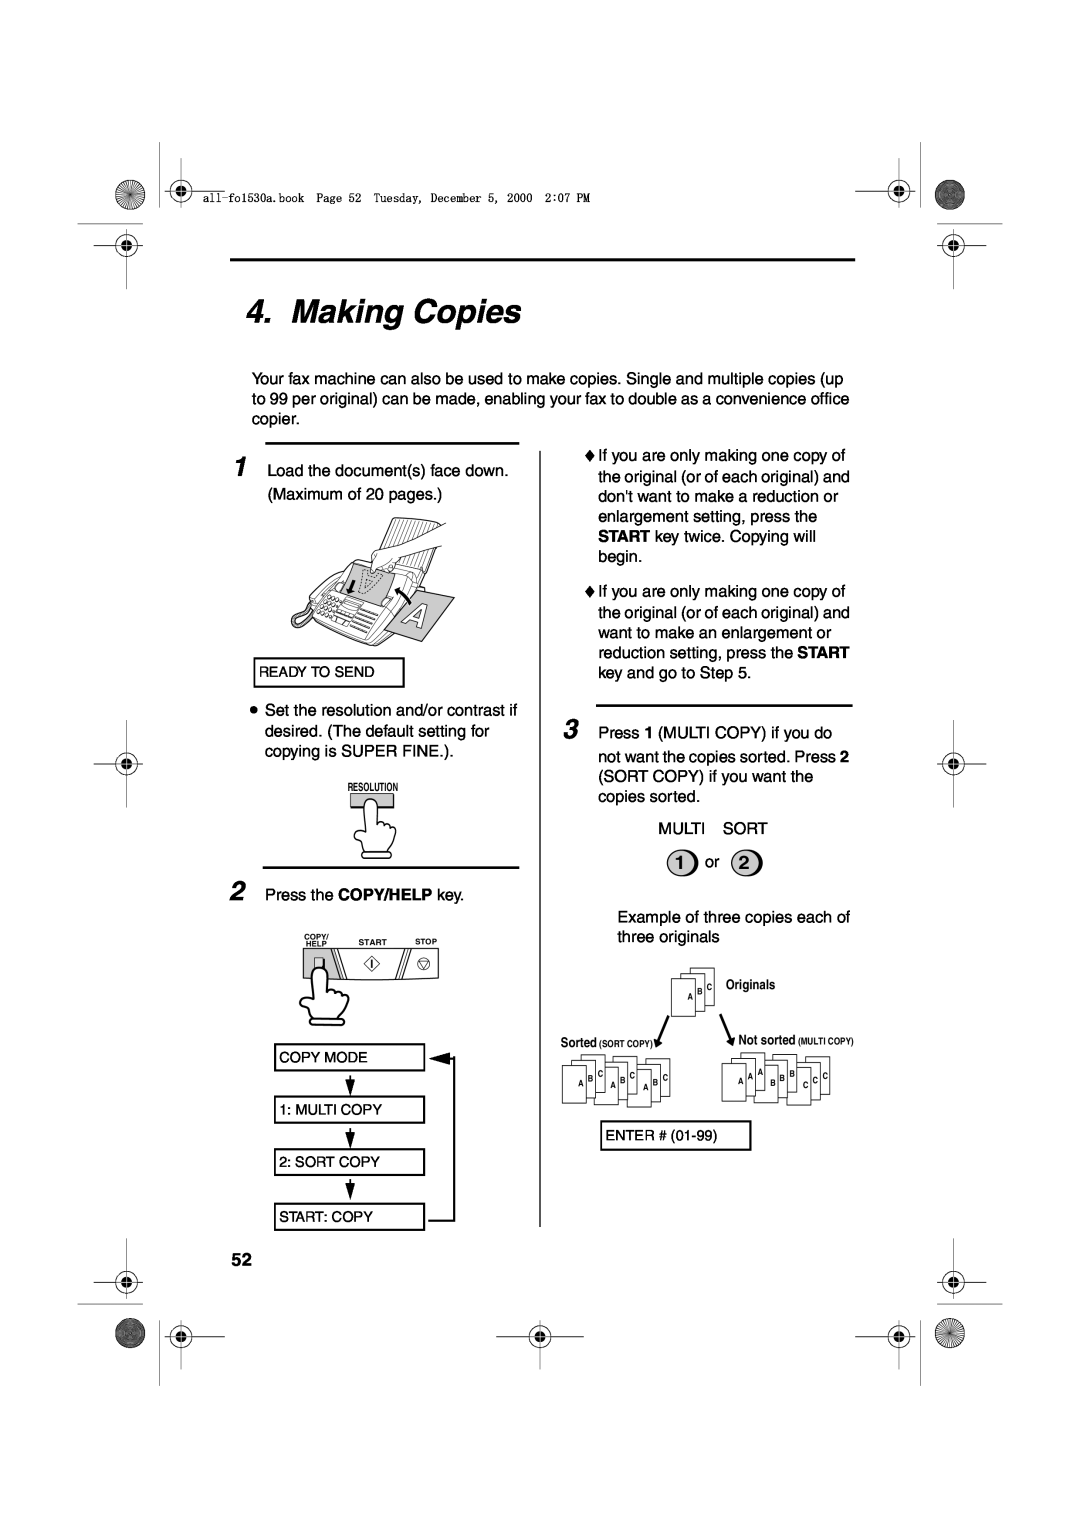 Sharp FO-1530 operation manual Making Copies, 1 or 